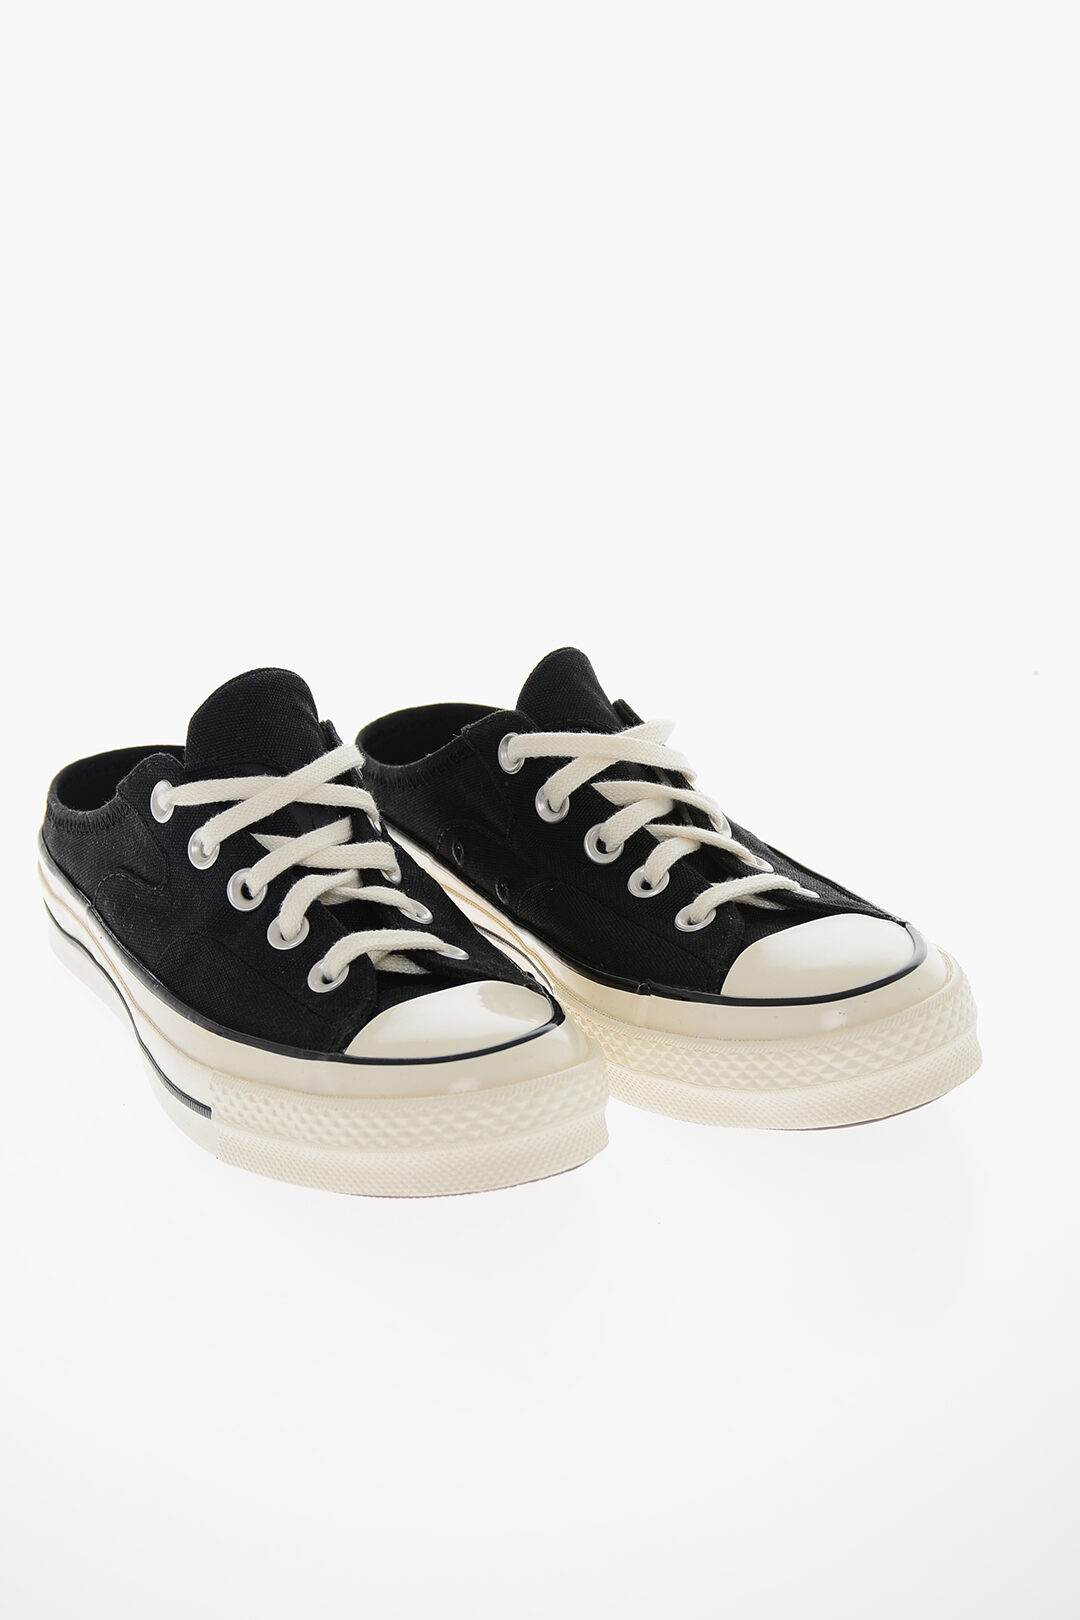 Converse ALL STAR CHUCK TAYLOR Cotton 70 Mules Sneakers Contrasting Laces women - Glamood Outlet